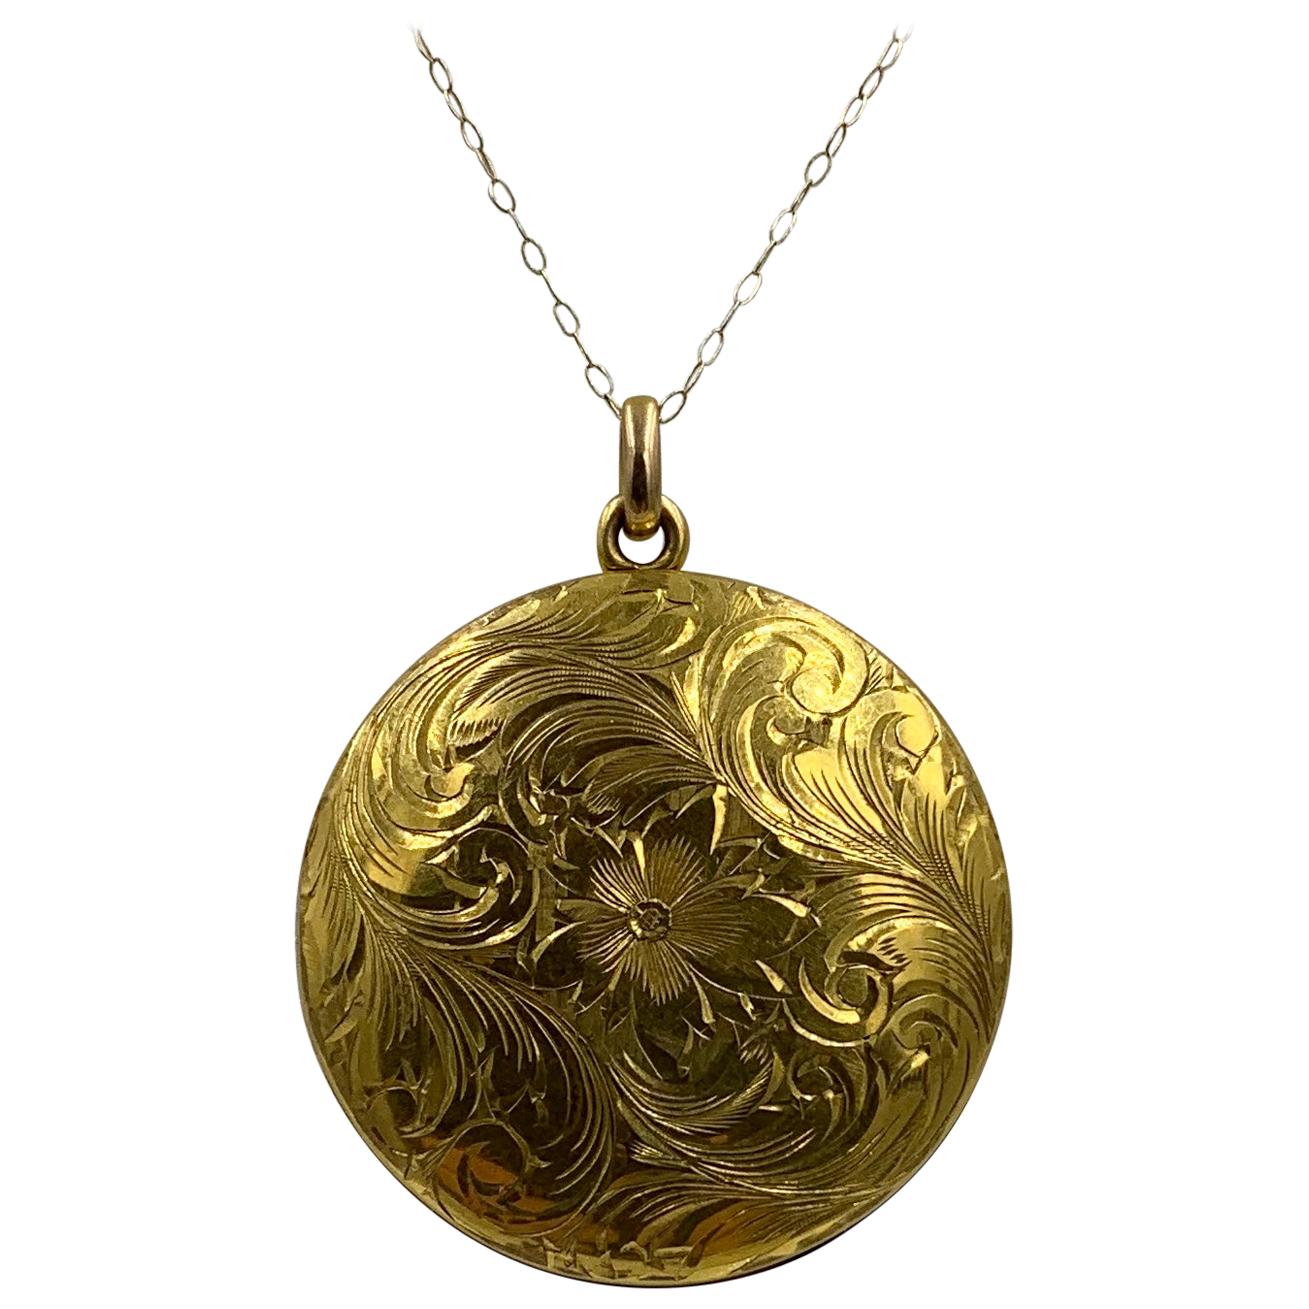 What is the best gold chain for a pendant?